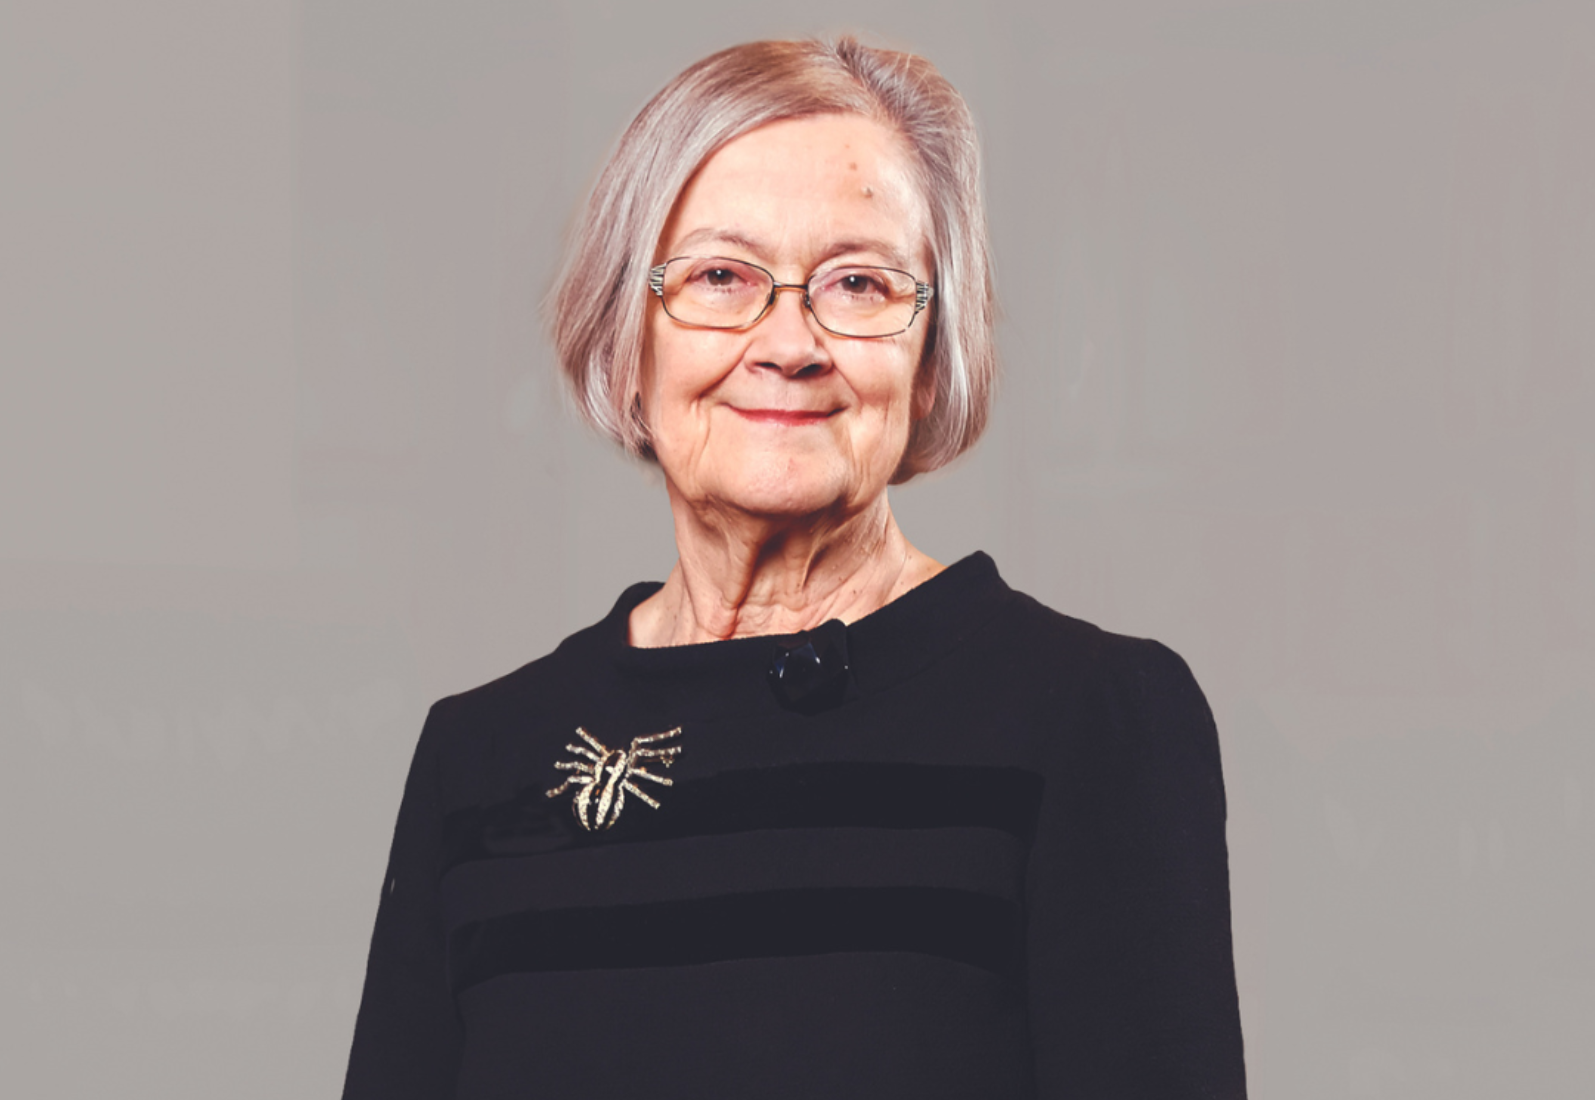 Lady Hale is coming to Raworths Harrogate Literature Festival